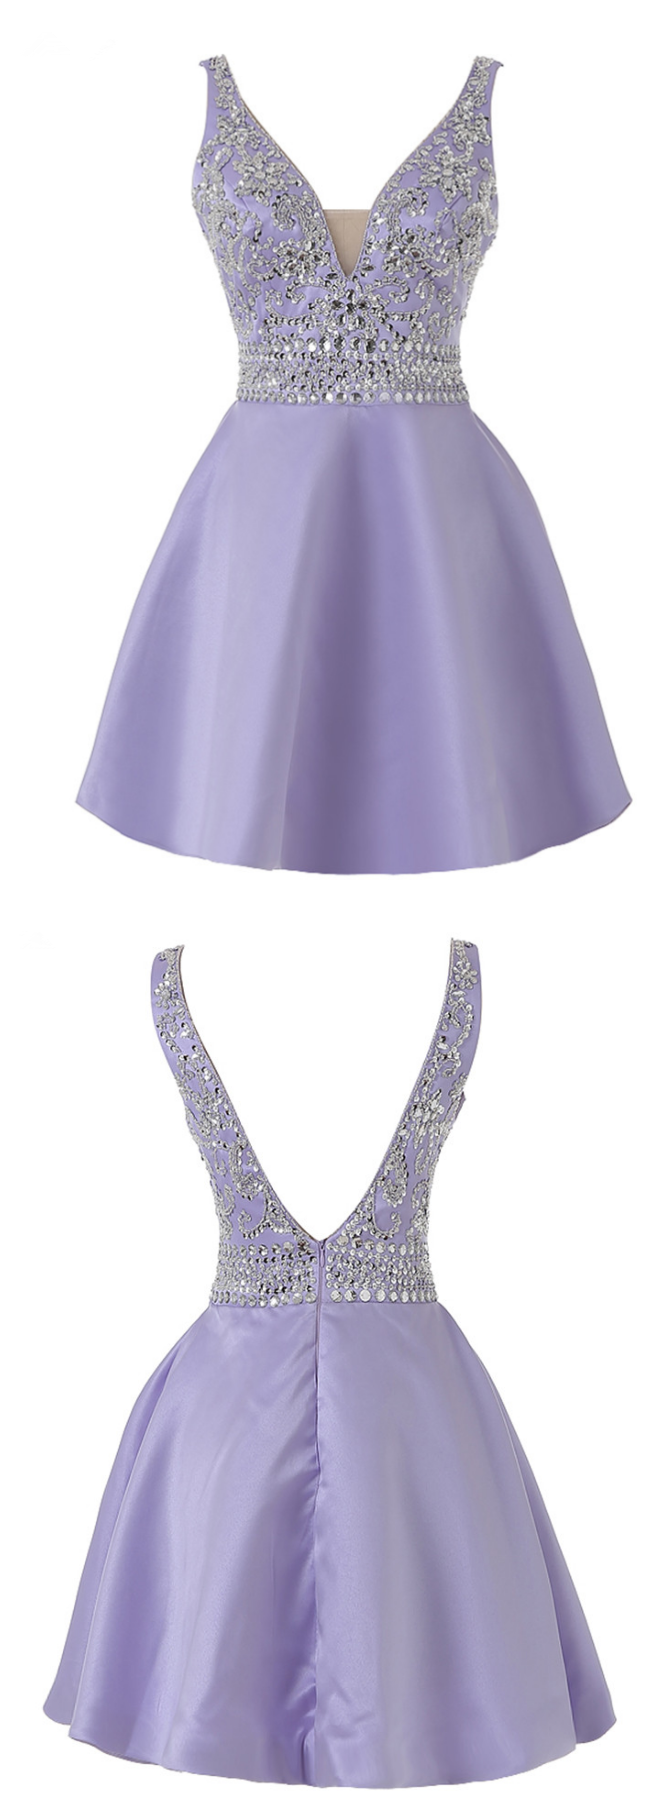 Real Photo V Neck Lavender Short Homecoming Dress, Satin Beaded Sexy Backless Mini Prom Party Gowns